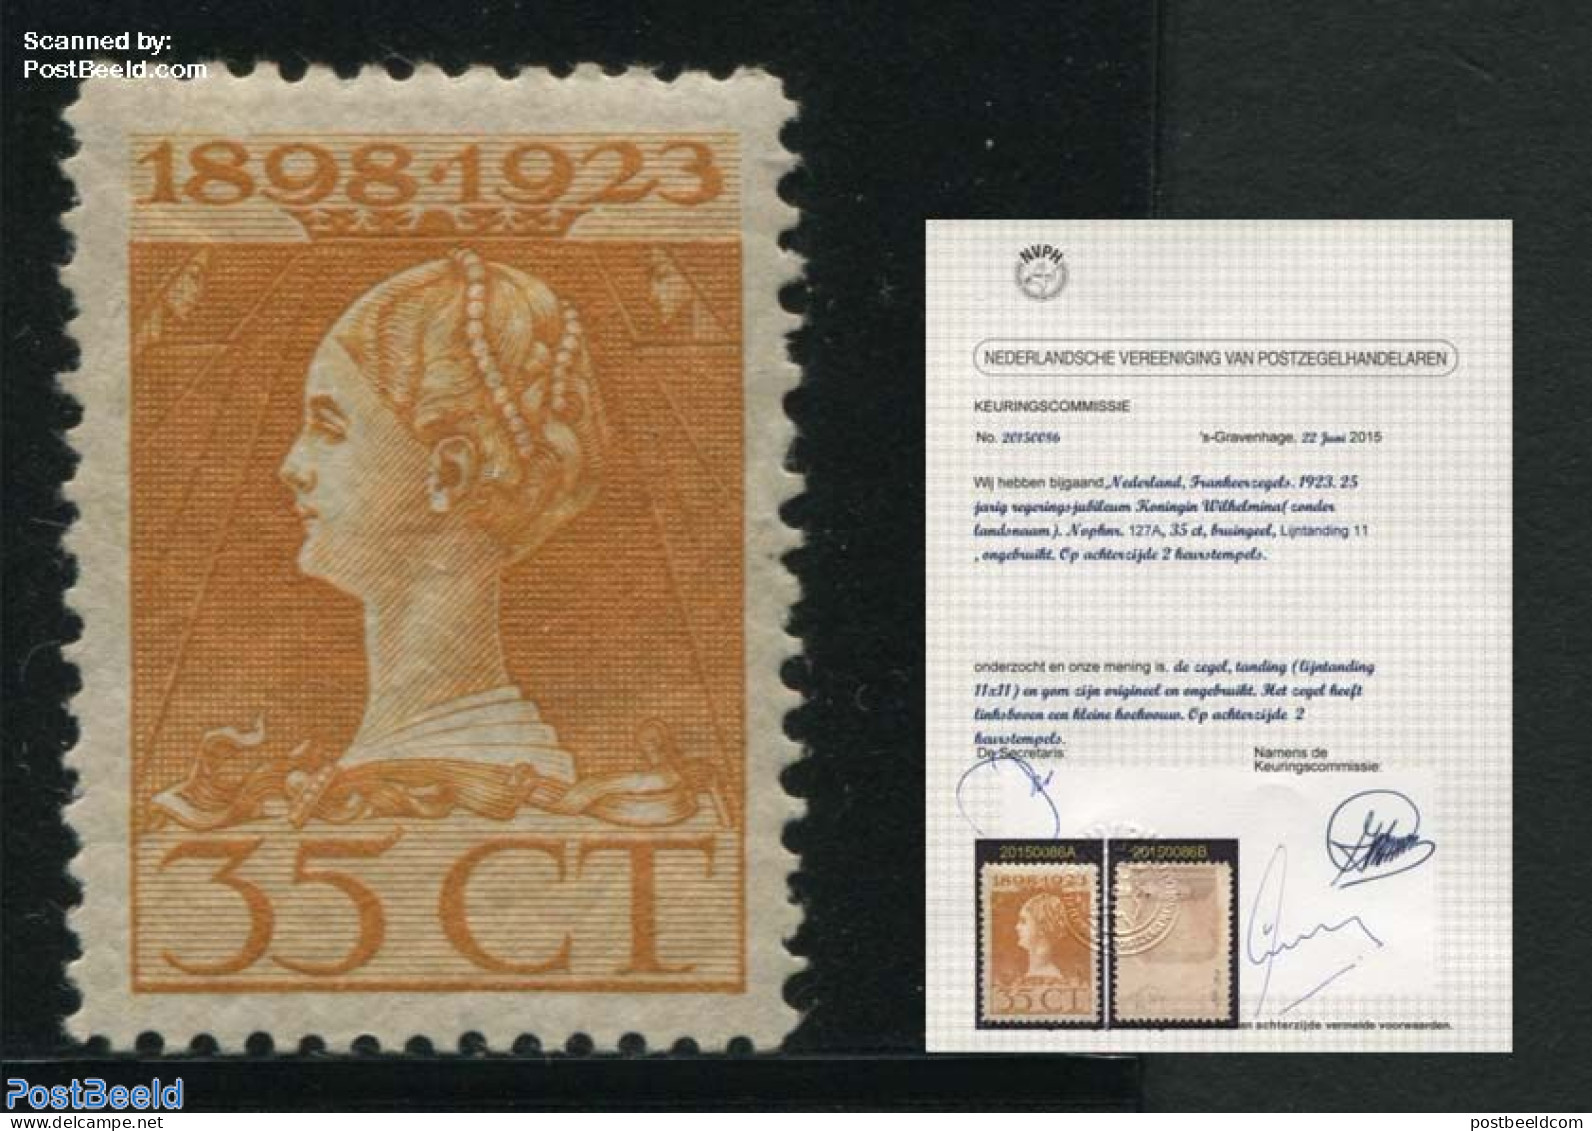 Netherlands 1923 Silver Jubilee 35c, Perf. 11. Very Rare Stamp With NVPH Certificate, Very Light Tiny Folding In Left,.. - Nuovi